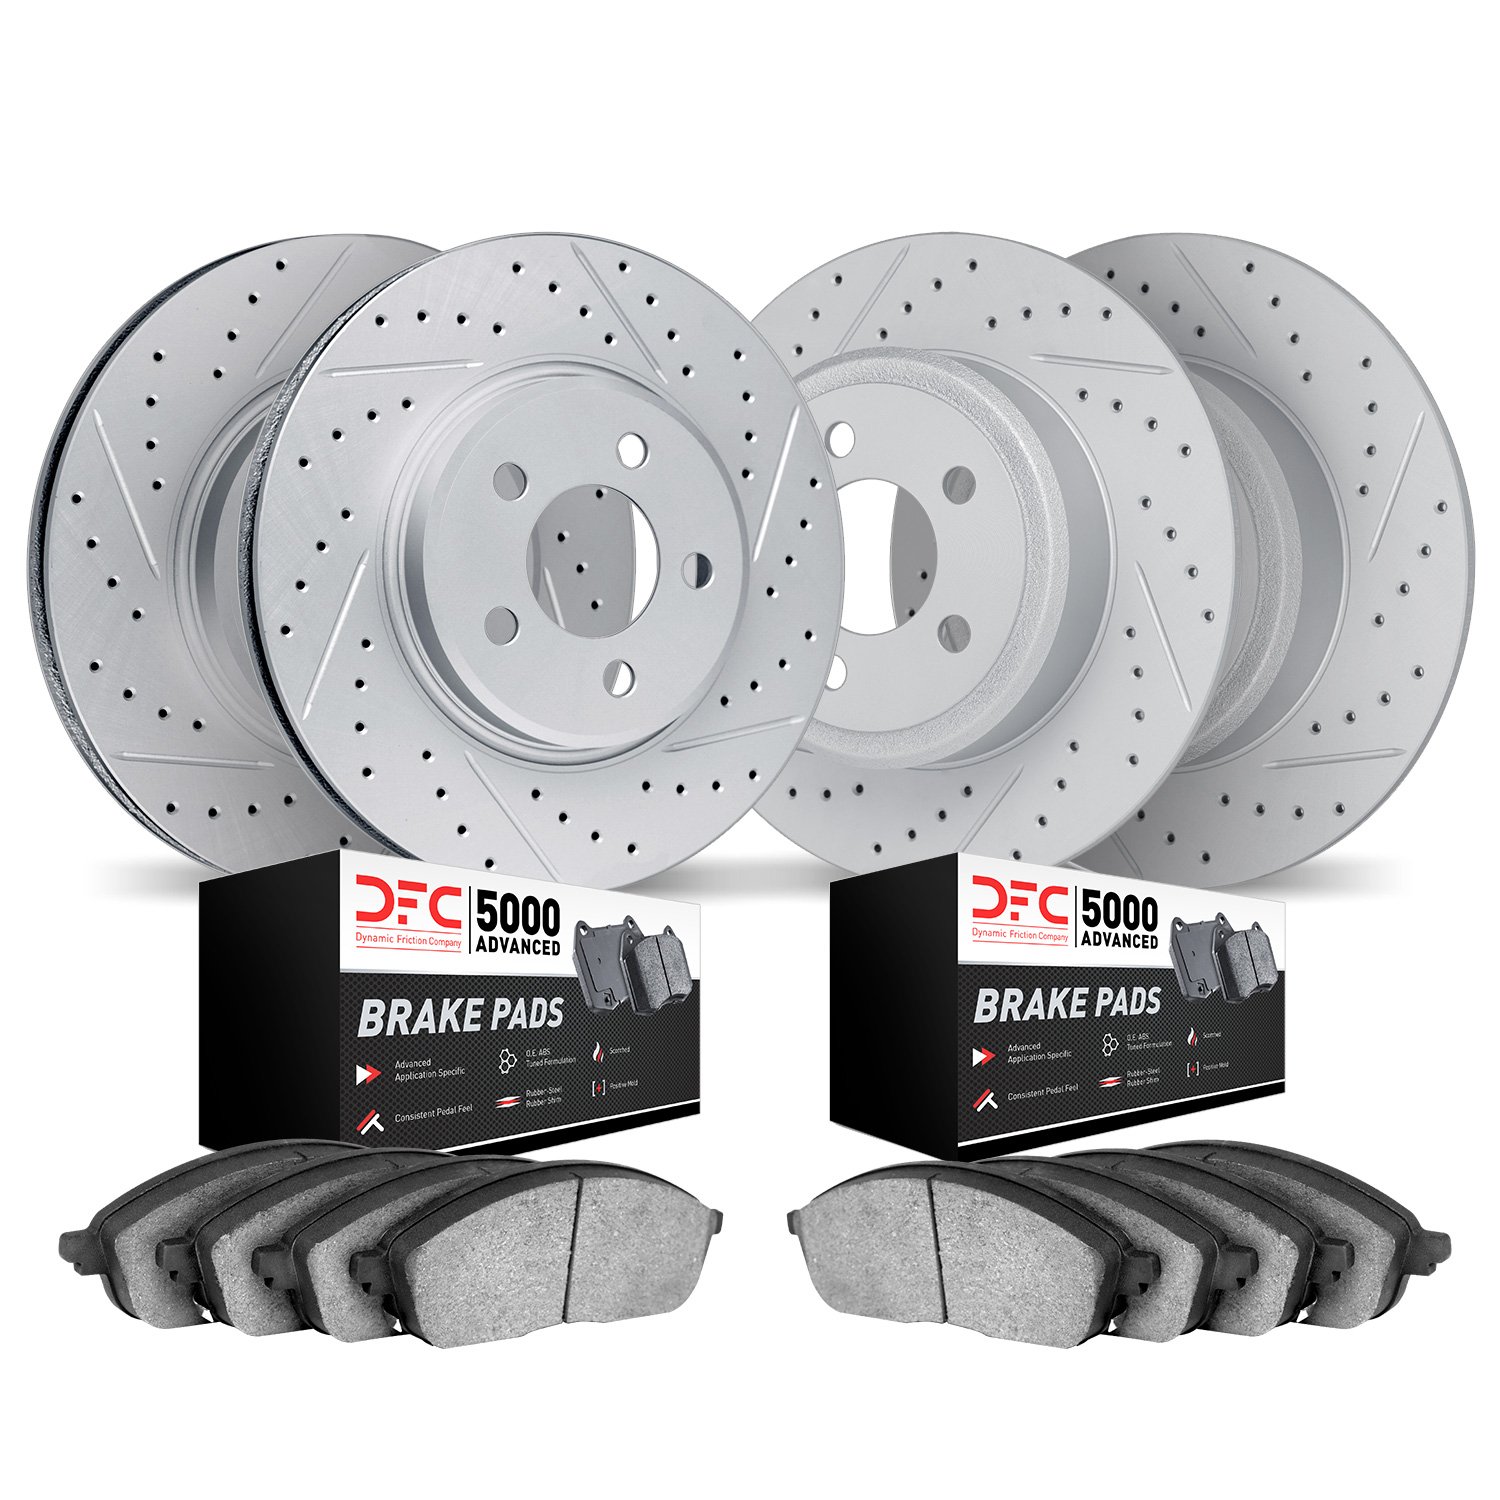 2504-40092 Geoperformance Drilled/Slotted Rotors w/5000 Advanced Brake Pads Kit, 2001-2007 Mopar, Position: Front and Rear